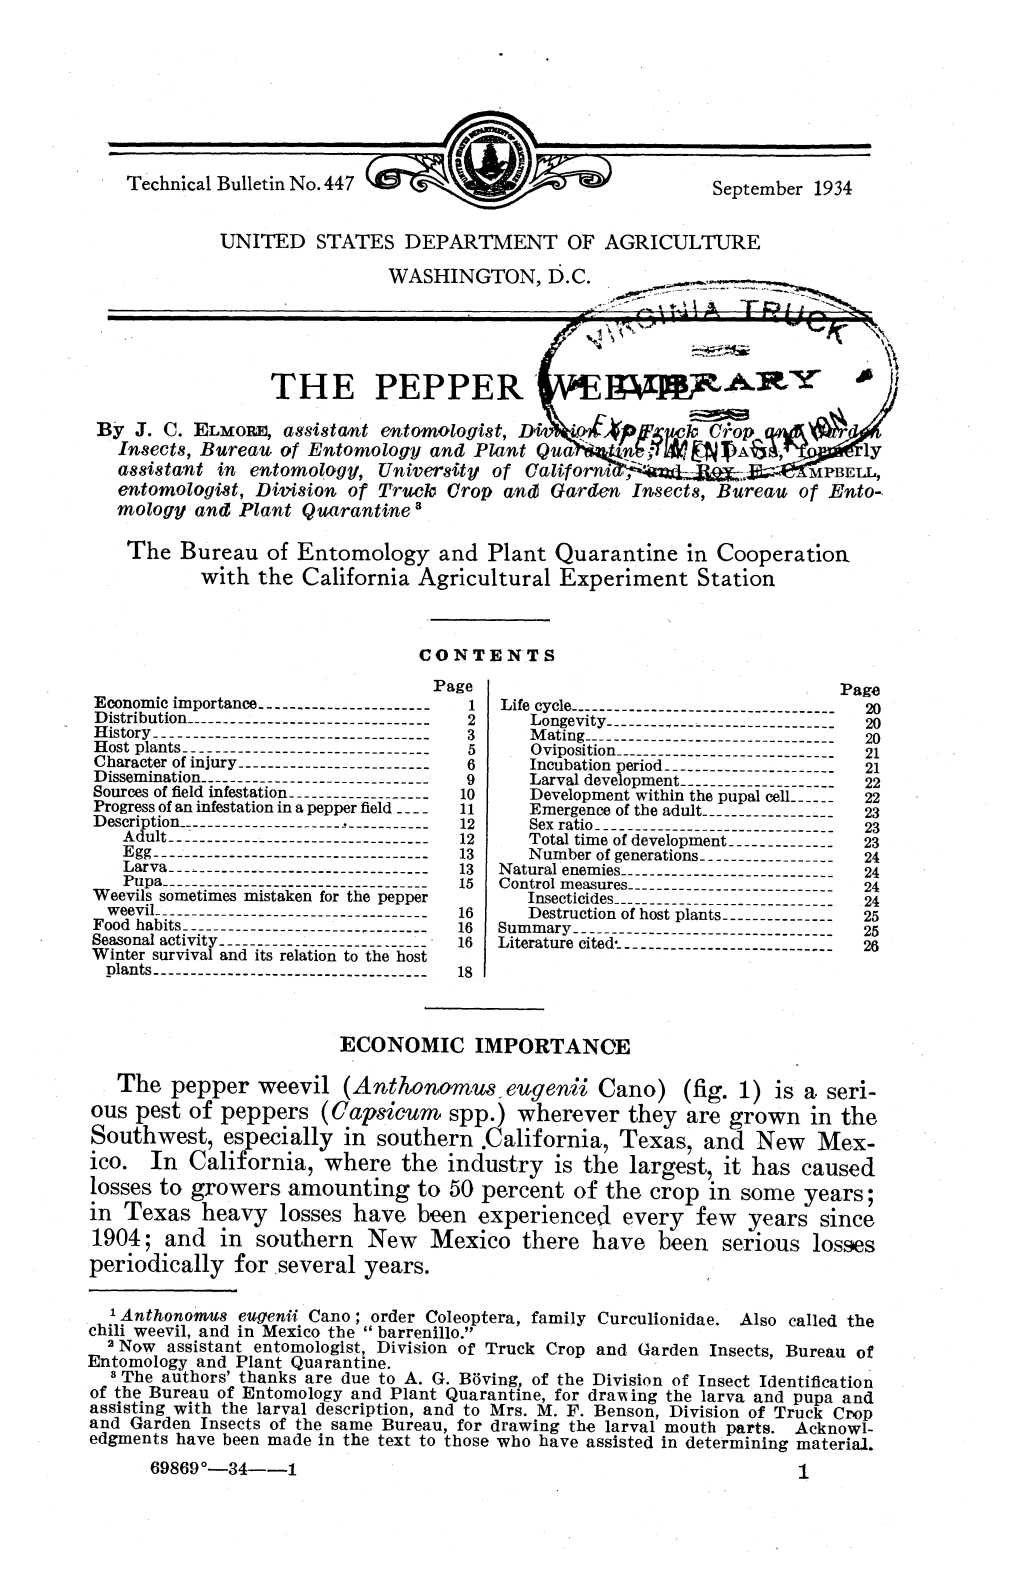 THE PEPPER by J